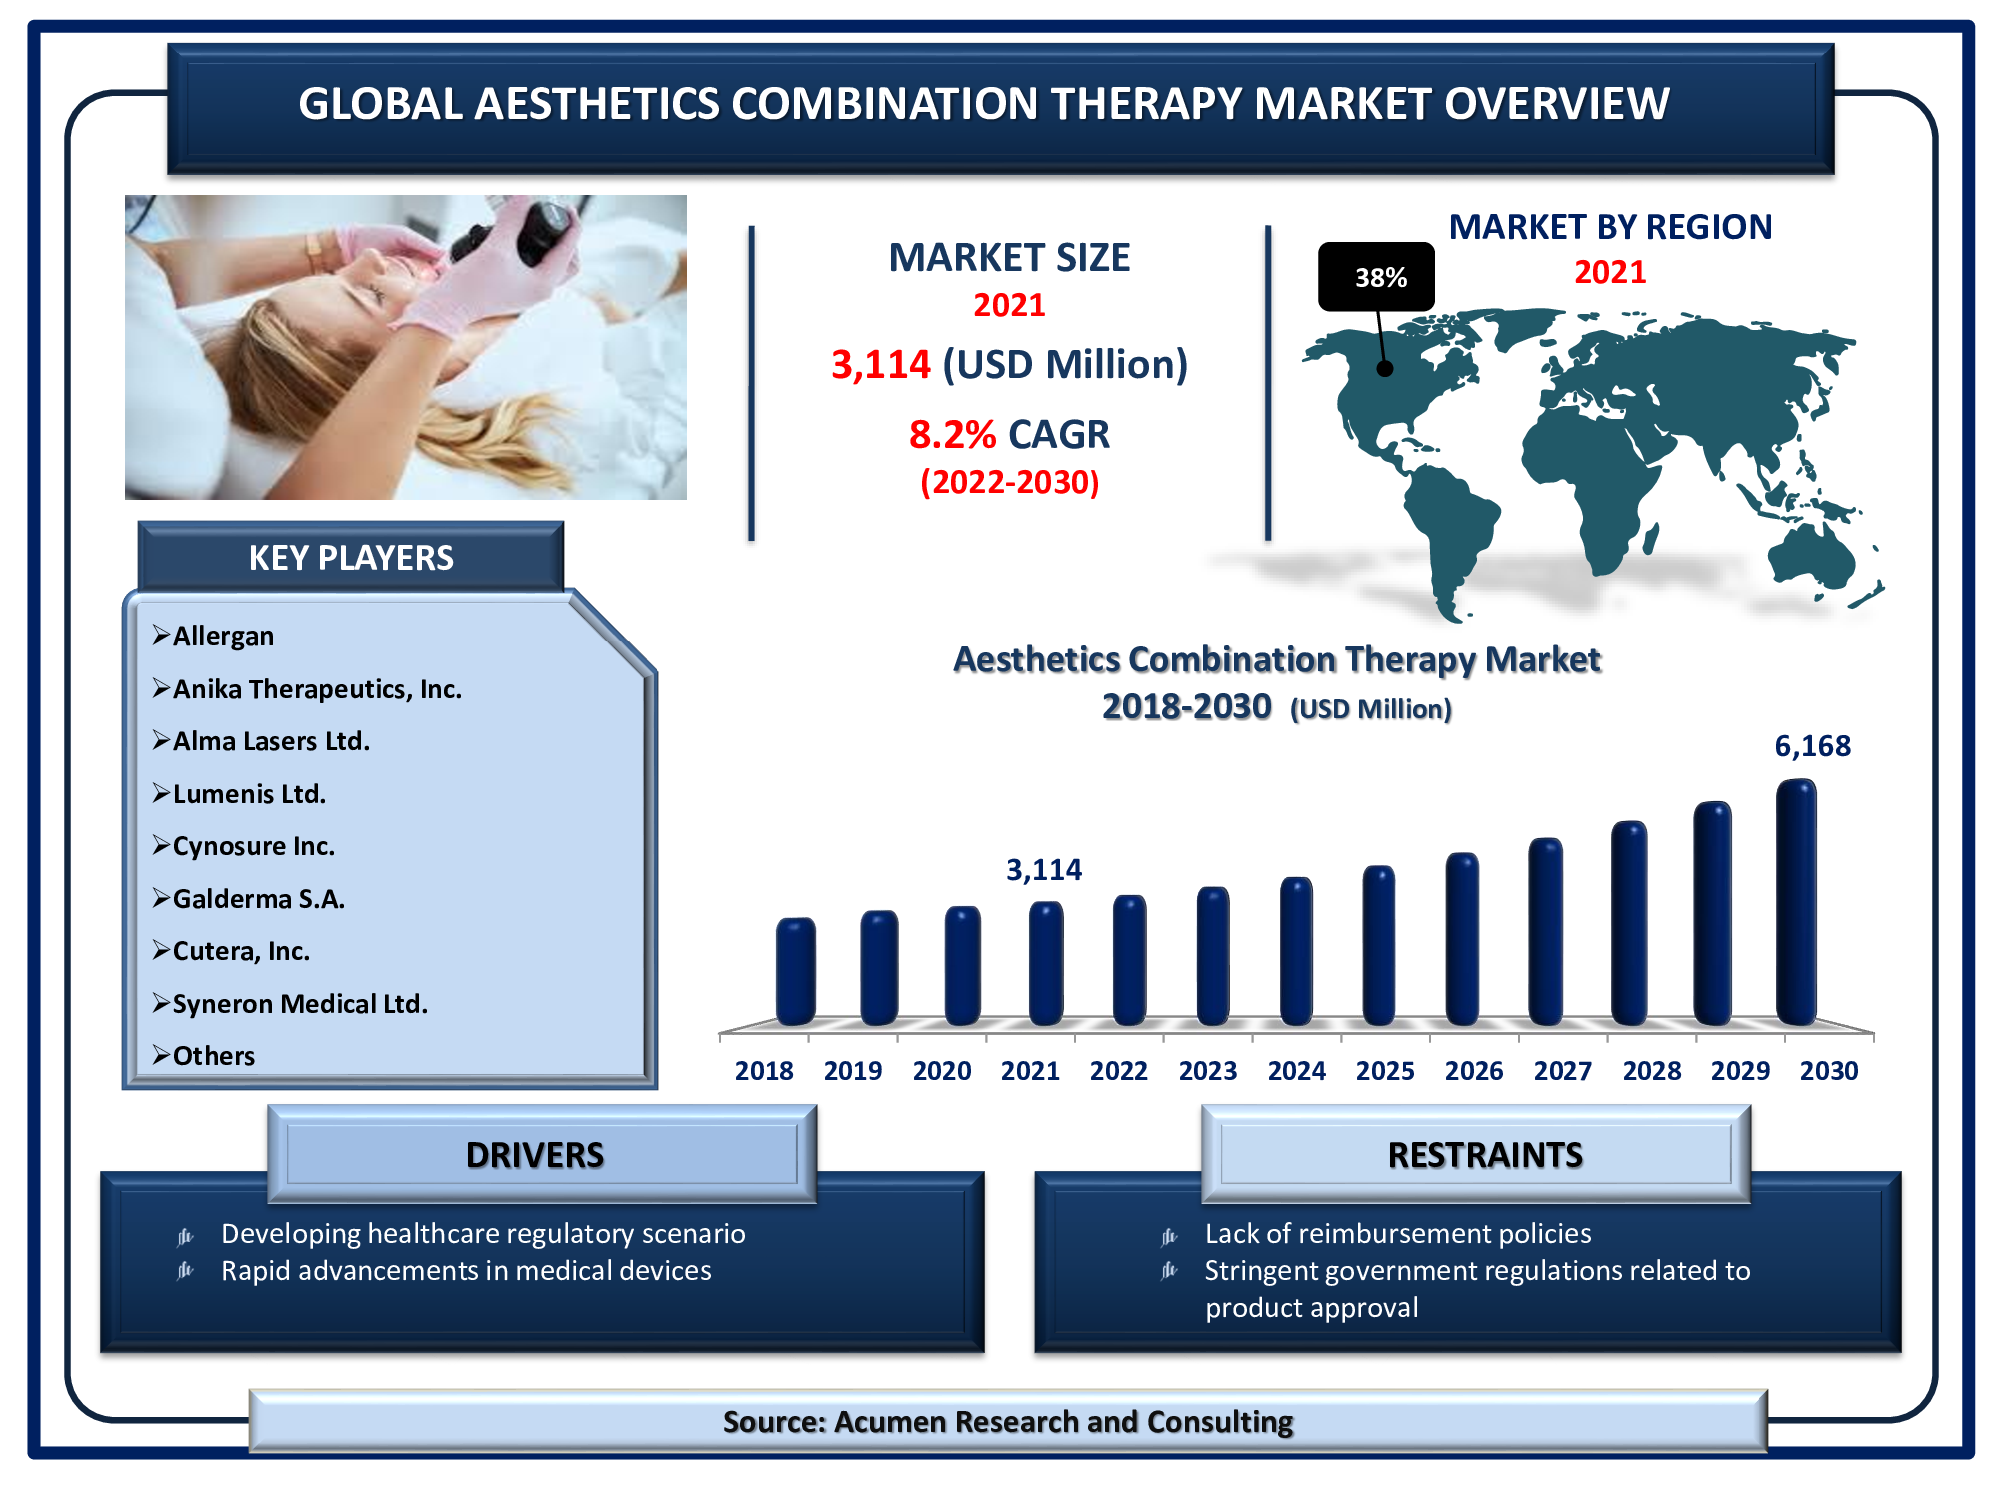 Aesthetics Combination Therapy Market will achieve a market size of USD 6,168 Million by 2030, budding at a CAGR of 8.2%